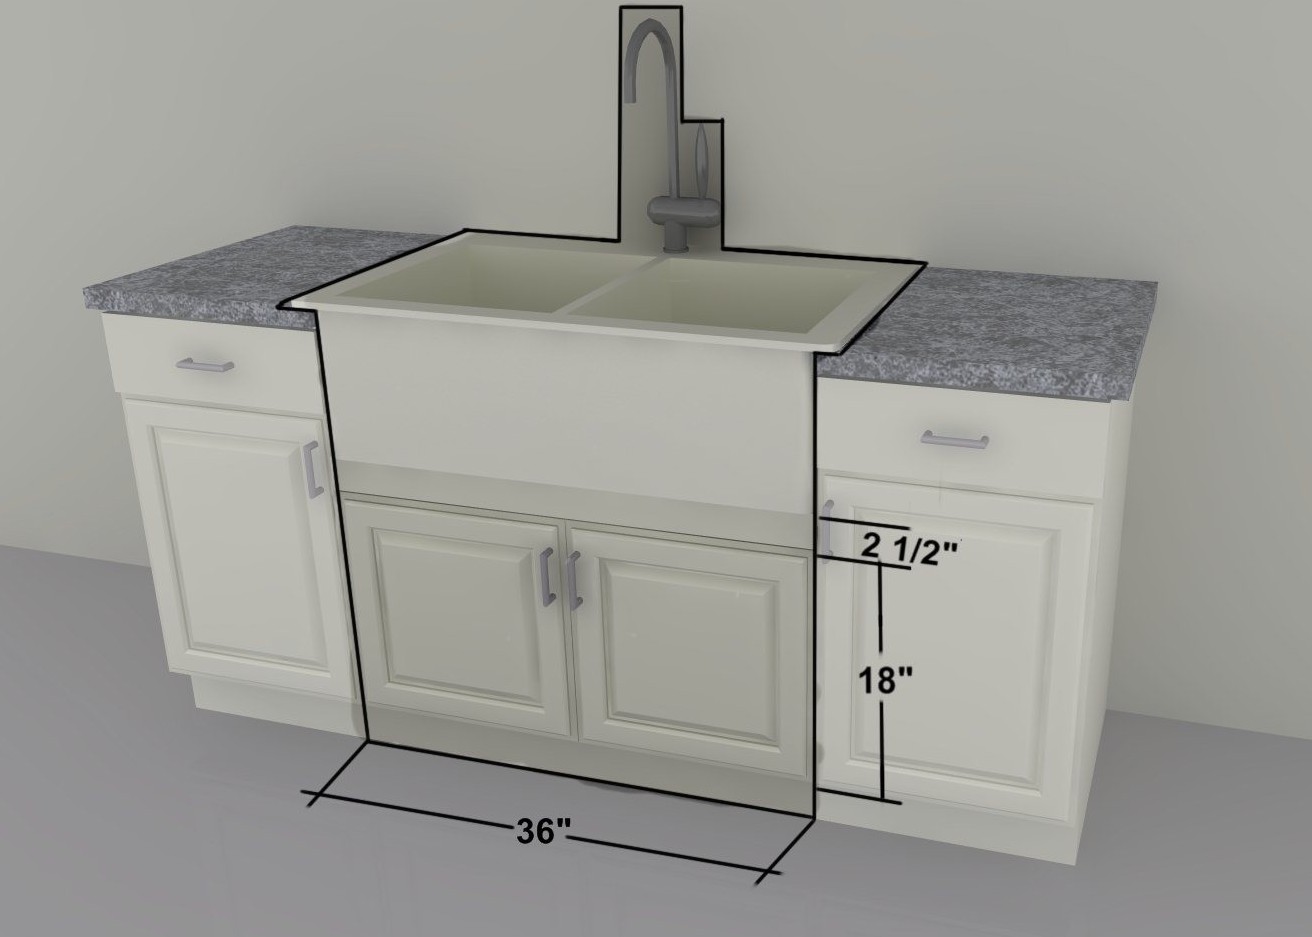 apartment size kitchen sink and cabinet